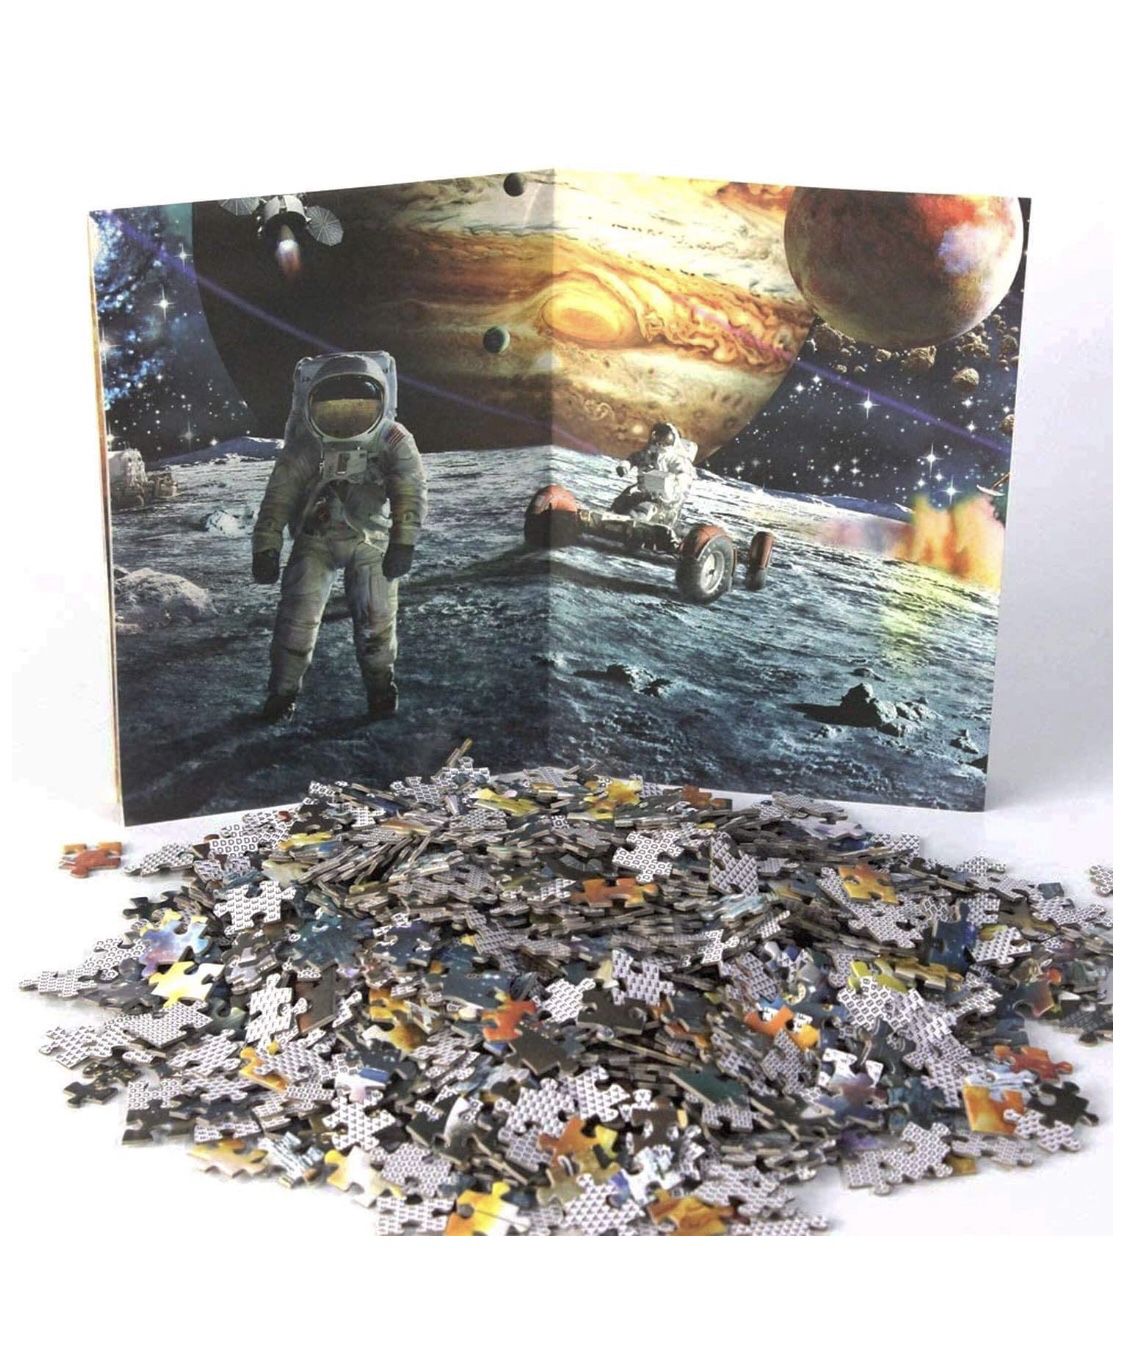 Space Puzzle 1000 Piece, Planets in Space and Astronaut Puzzle Games Suitable for Adults and Children. Activities to Help Children Think About Parent